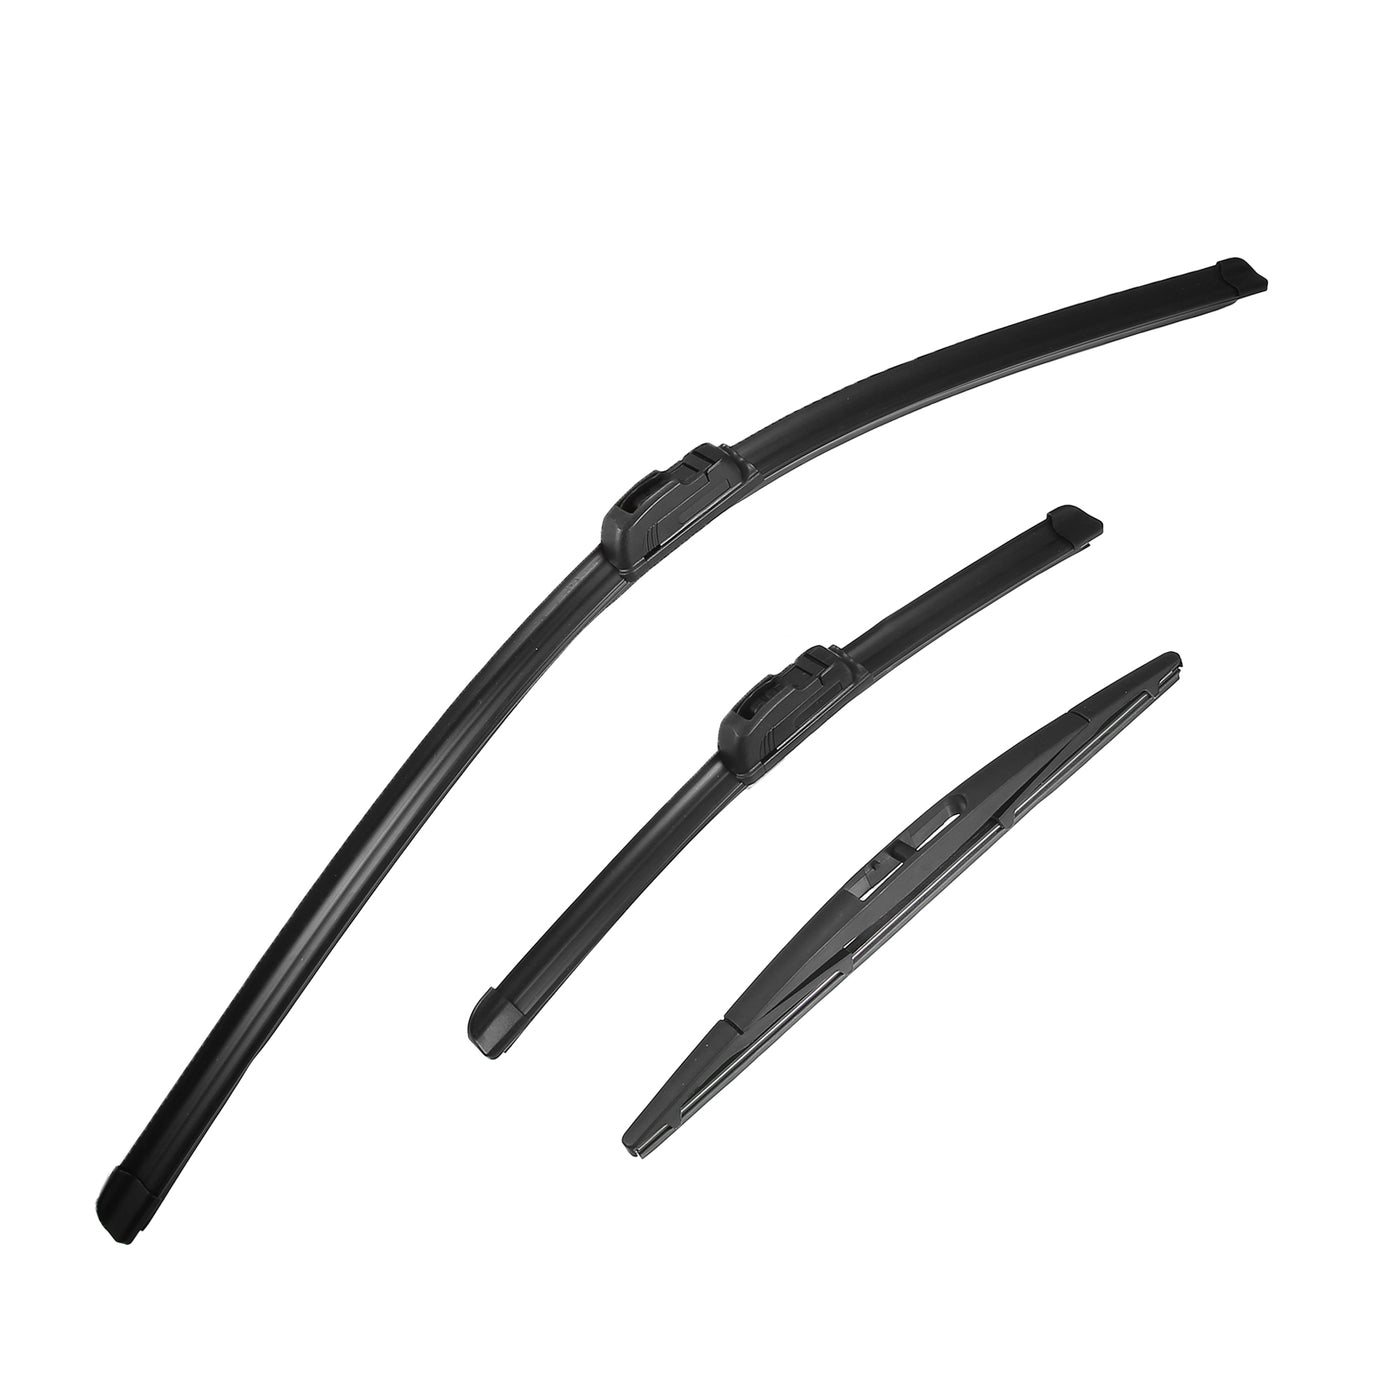 ACROPIX 28" 14" 12" Front Rear Windshield Wiper Blade Set Fit for Nissan Versa Note - Pack of 3 Black